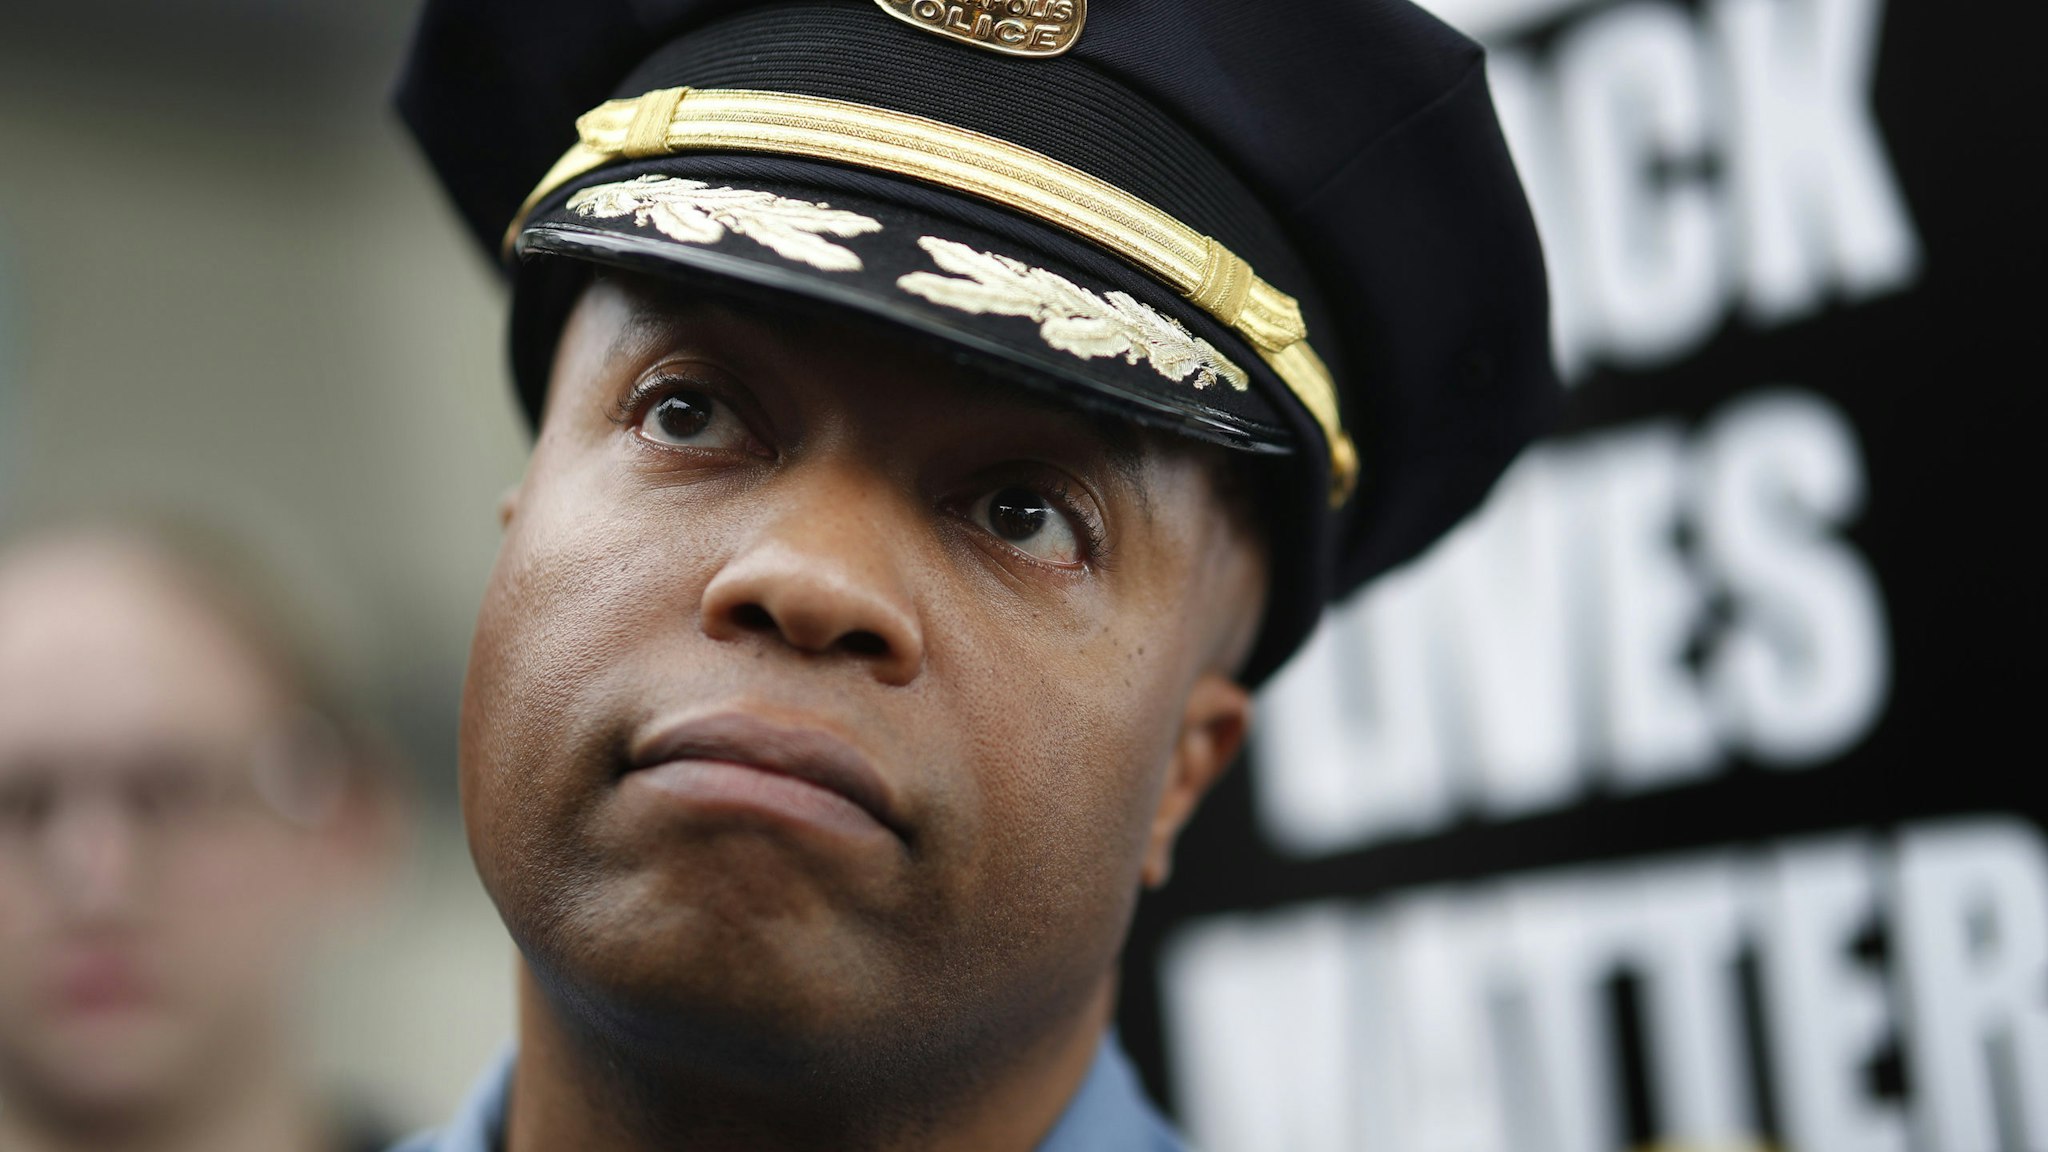 Minneapolis Police Chief Medaria Arradondo left, listened as north side community members held a protest and rally at the 4th precinct on Plymouth avenue in response to the shooting death of Thurman Blevins by Minneapolis Police Sunday June 24, 2018 in Minneapolis , MN. ] JERRY HOLT ‚Ä¢ jerry.holt@startribune.com(Photo By Jerry Holt/Star Tribune via Getty Images)